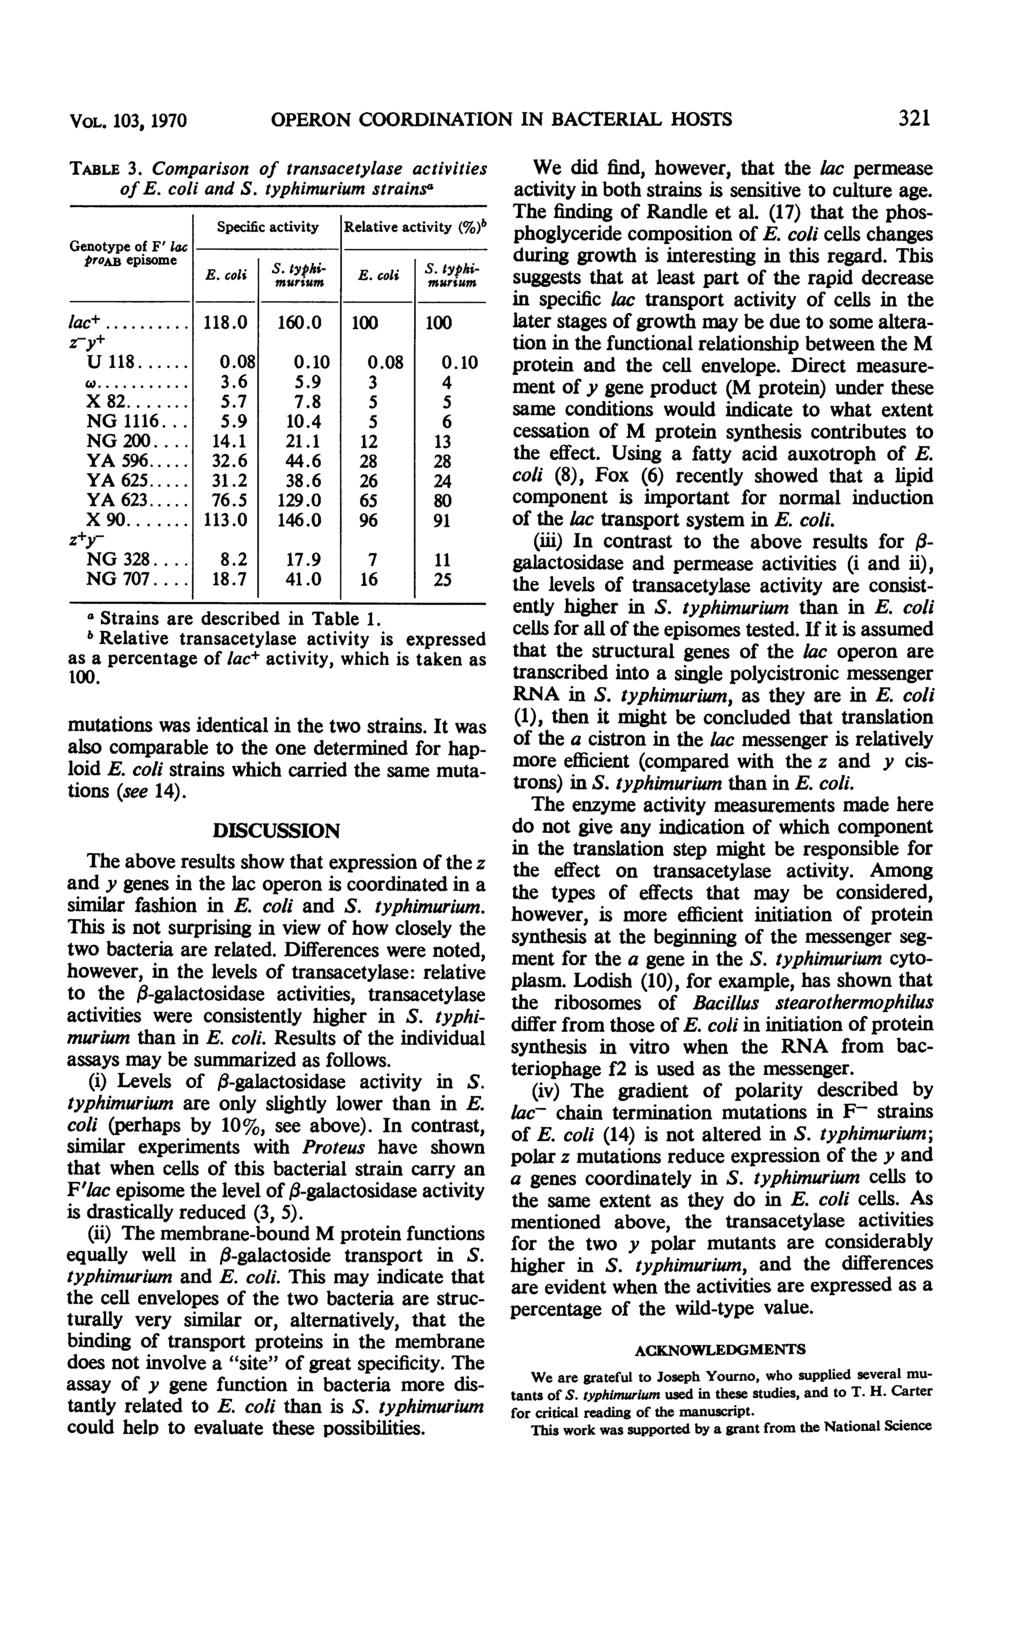 VOL. 103, 1970 OPERON COORDINATION IN BACTERIAL HOSTS TABLE 3. Comparison of transacetylase activities of E. coli and S.